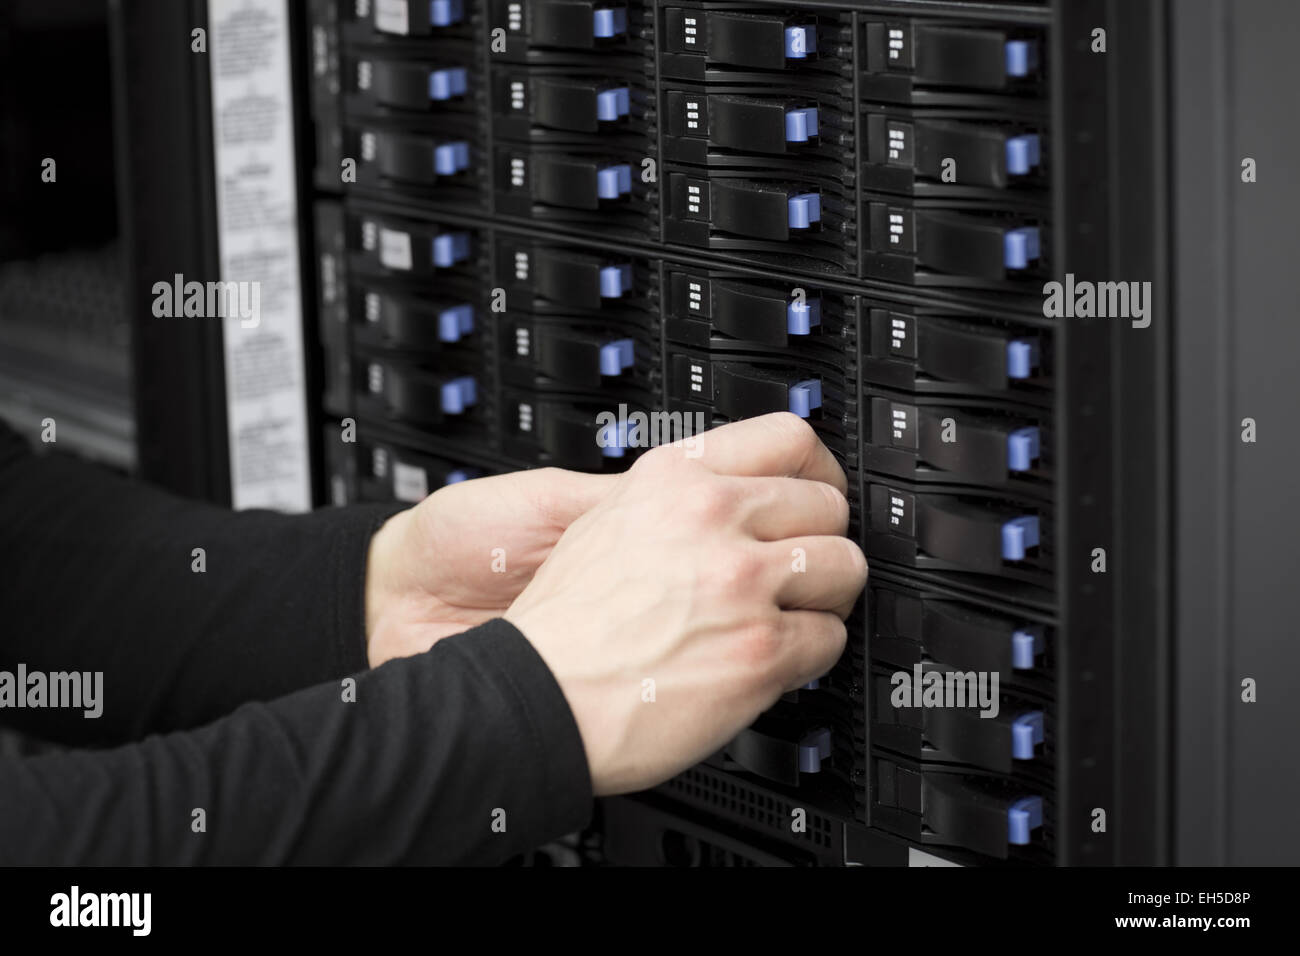 It engineer / technician working in a data center. Replace a hard drive in a SAN. Stock Photo